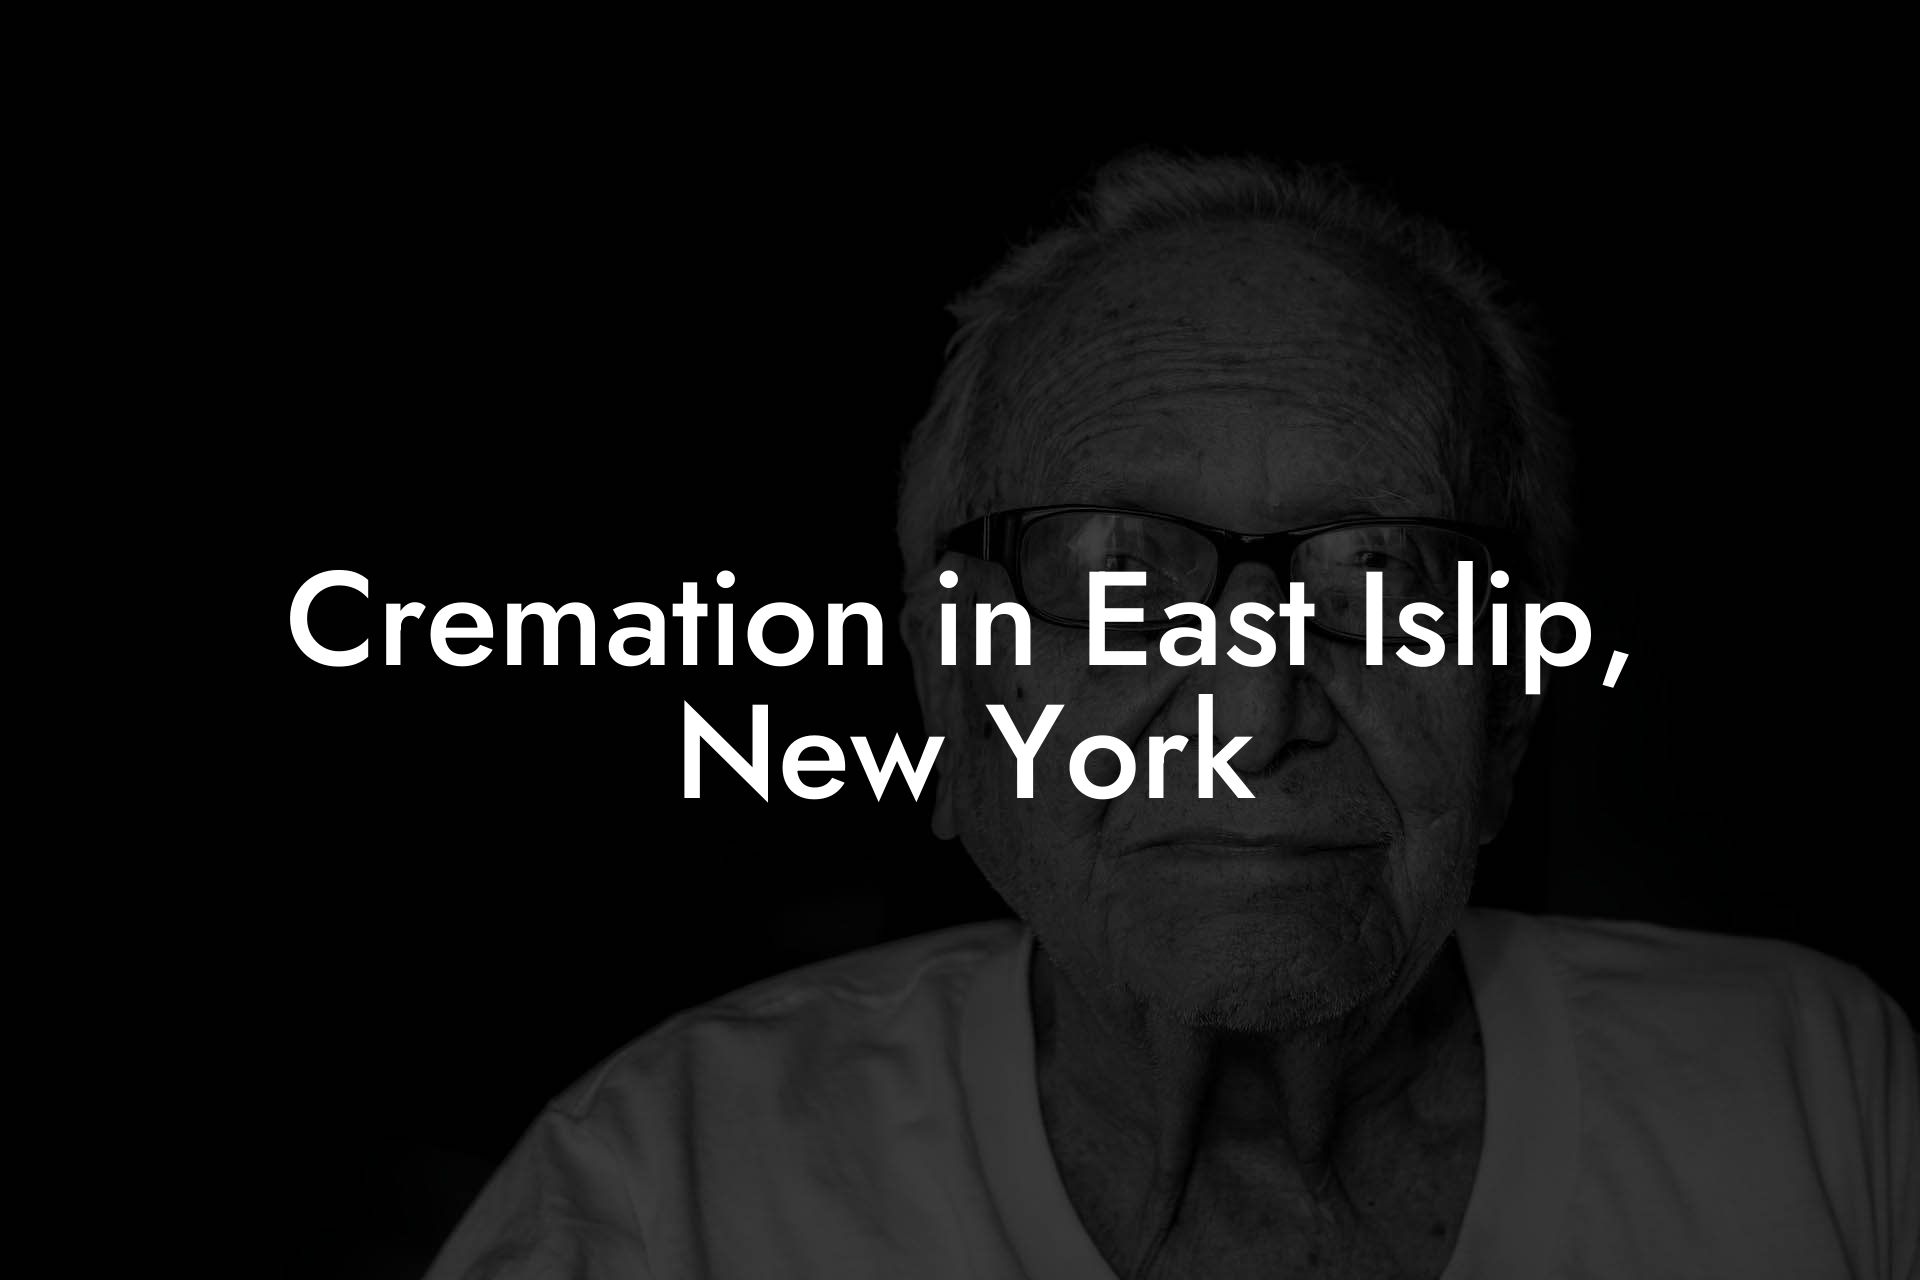 Cremation in East Islip, New York